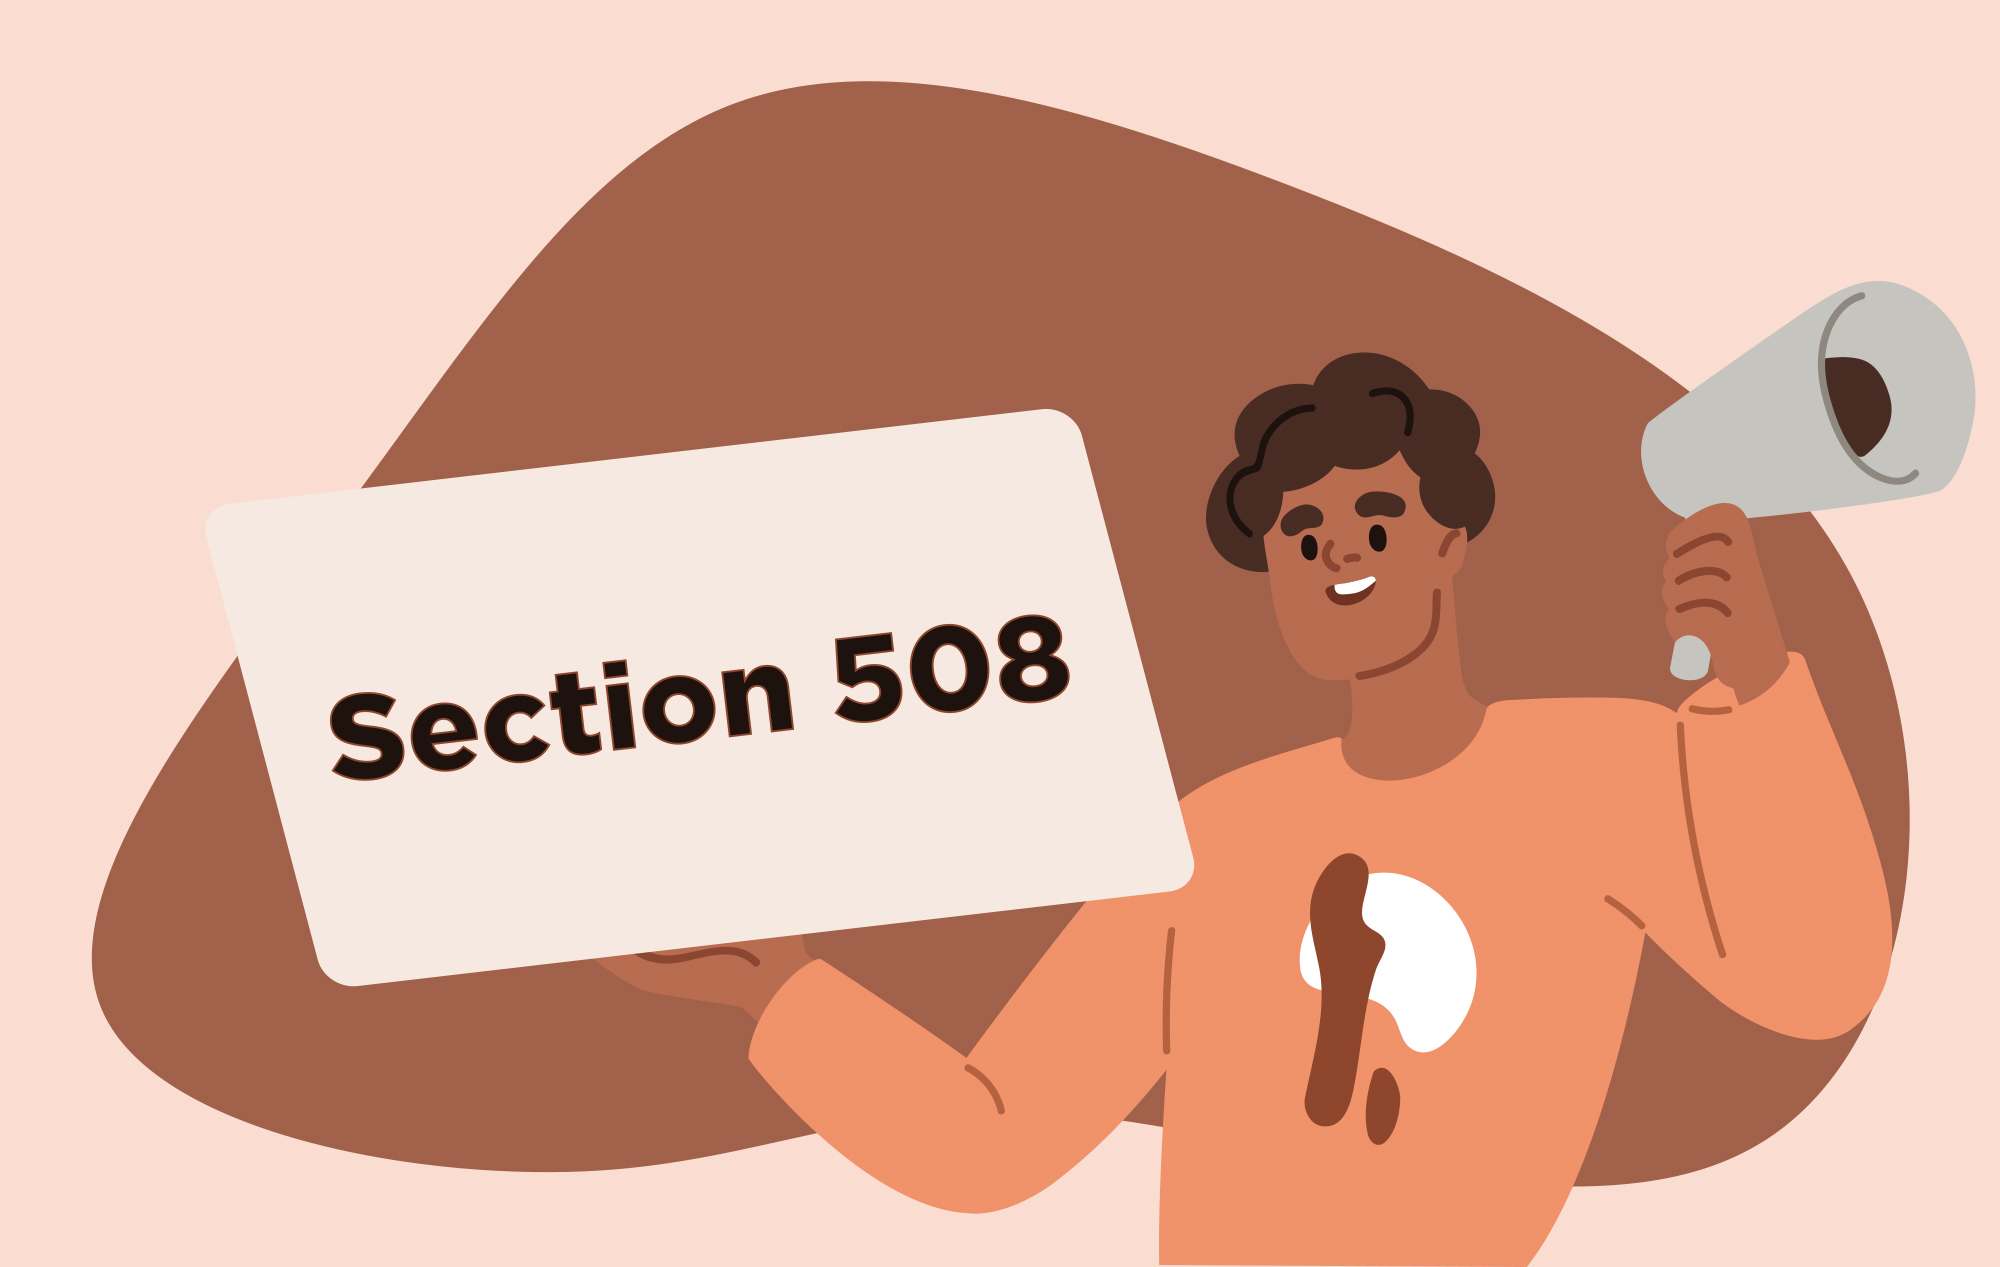 Illustration of a person holding a megaphone and a sign that says 'Section 508.'